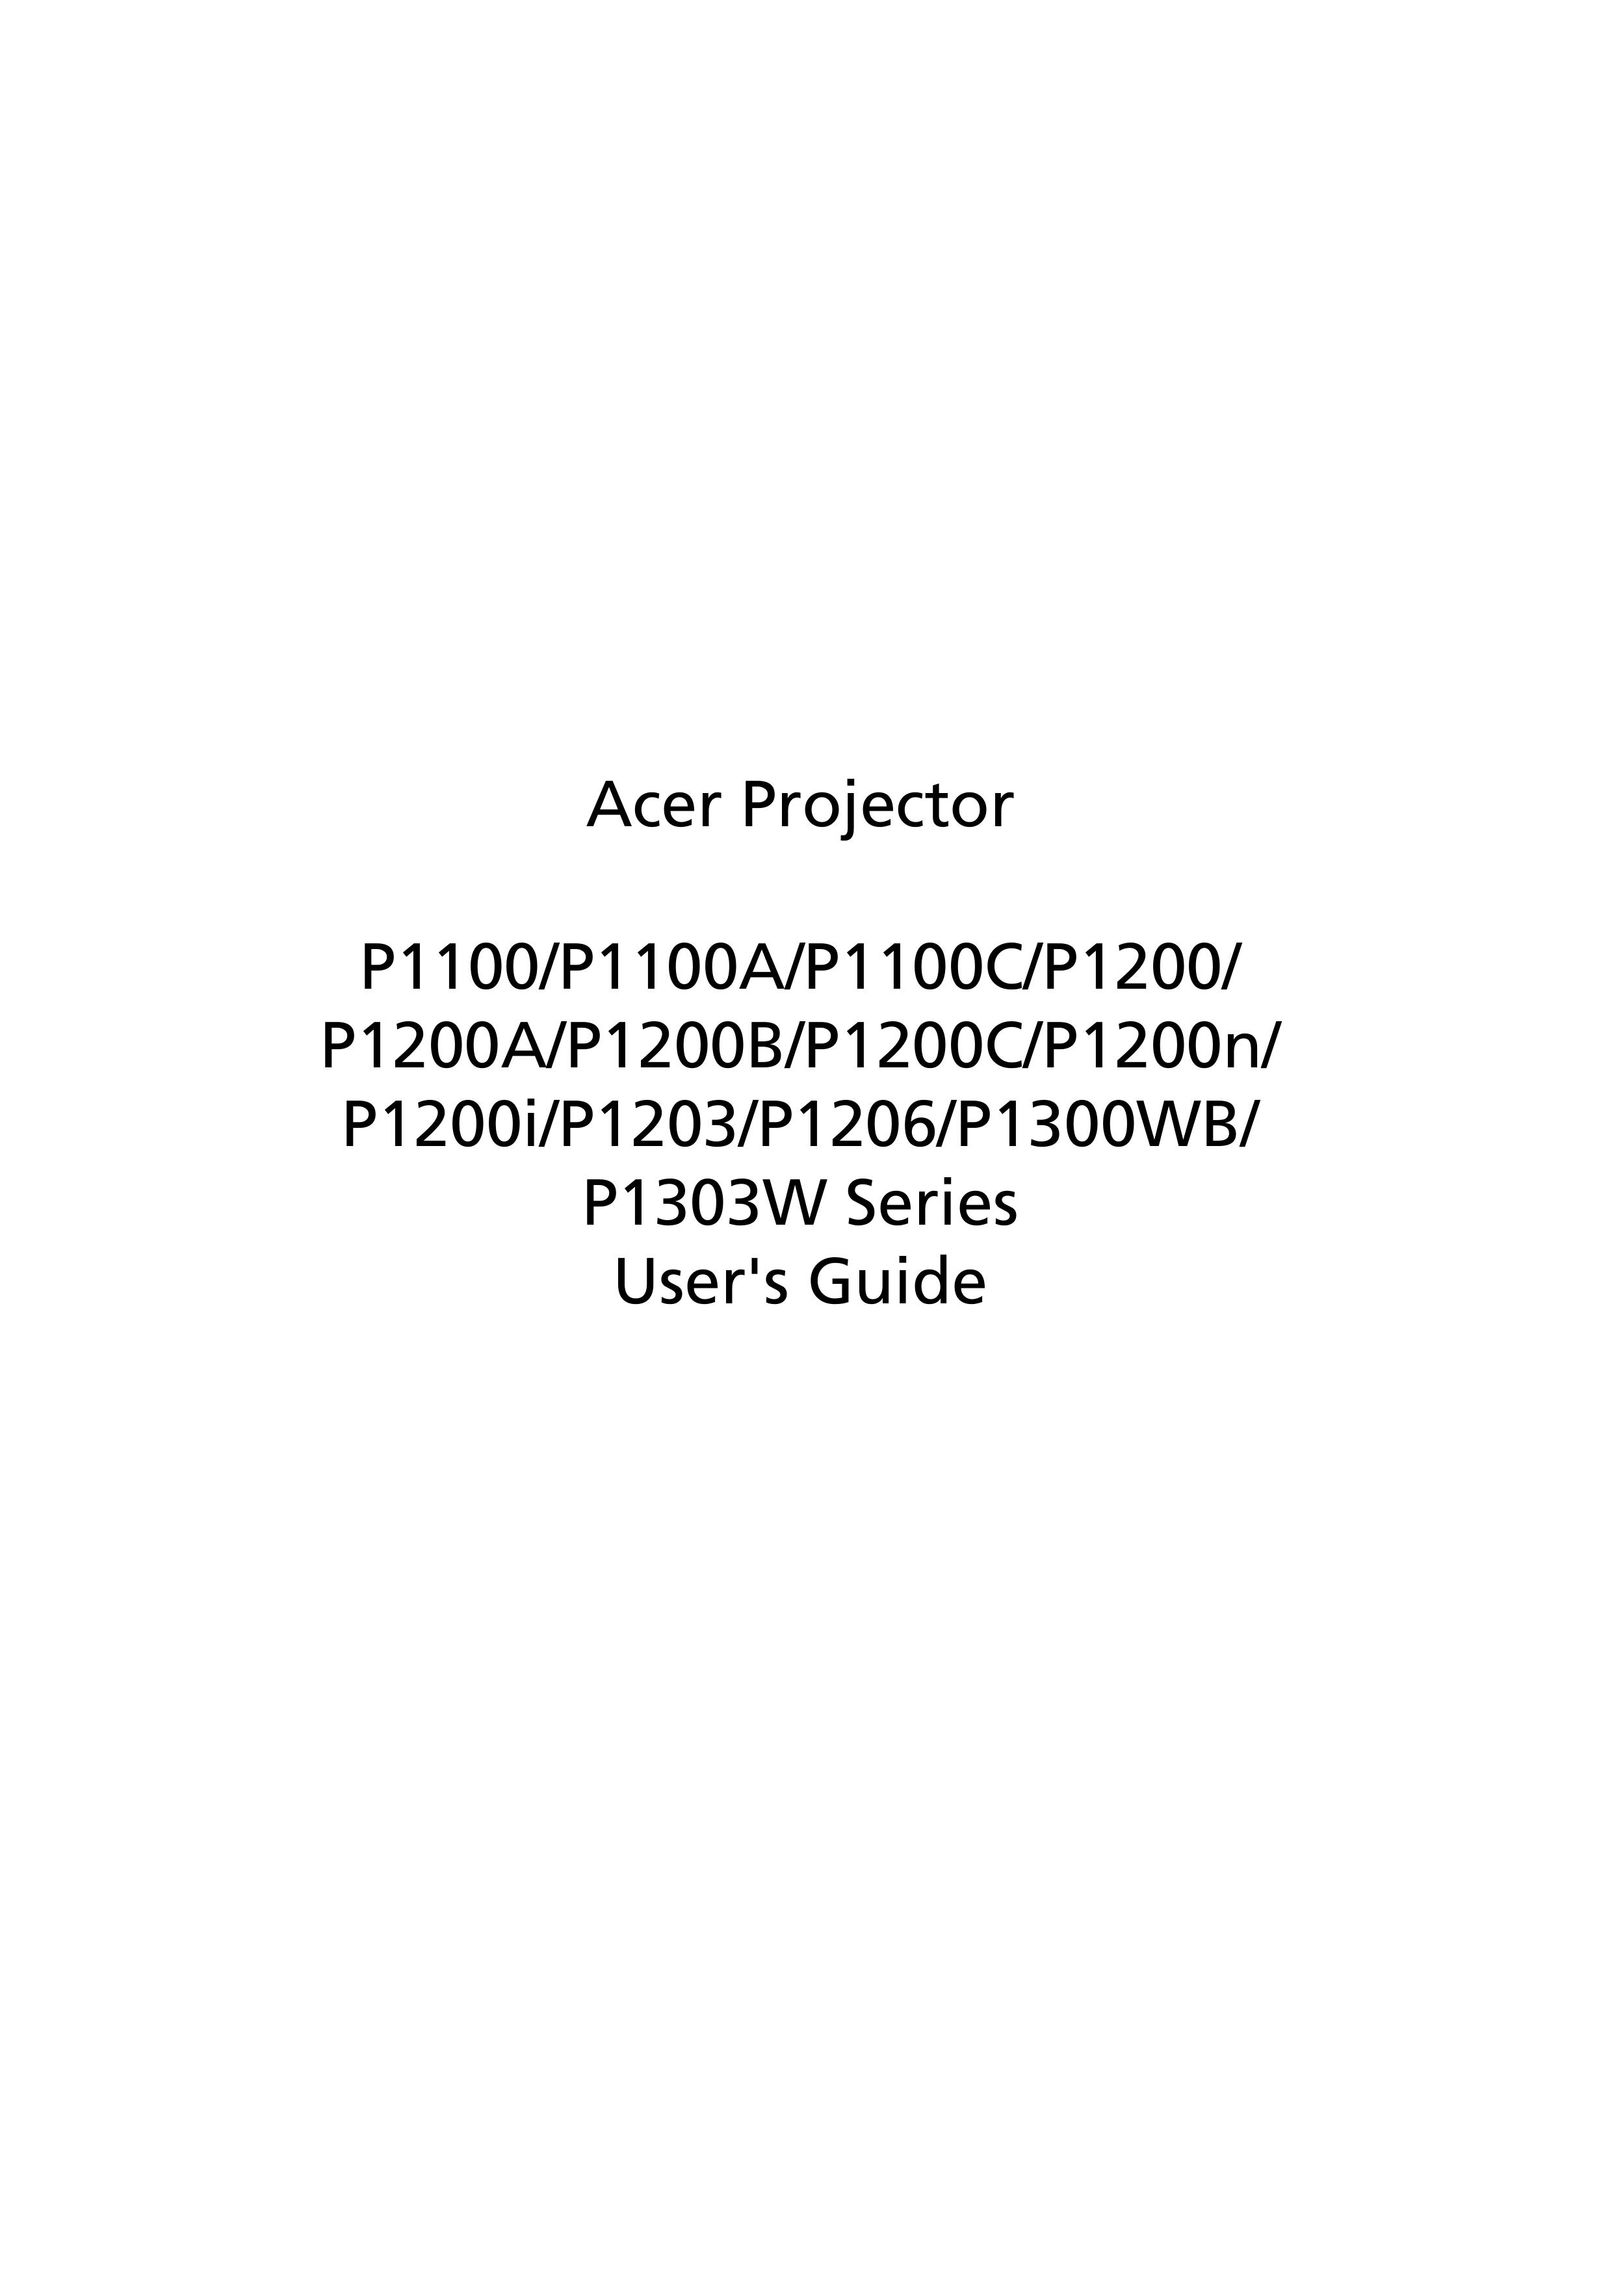 Acer P1300WB Projector User Manual